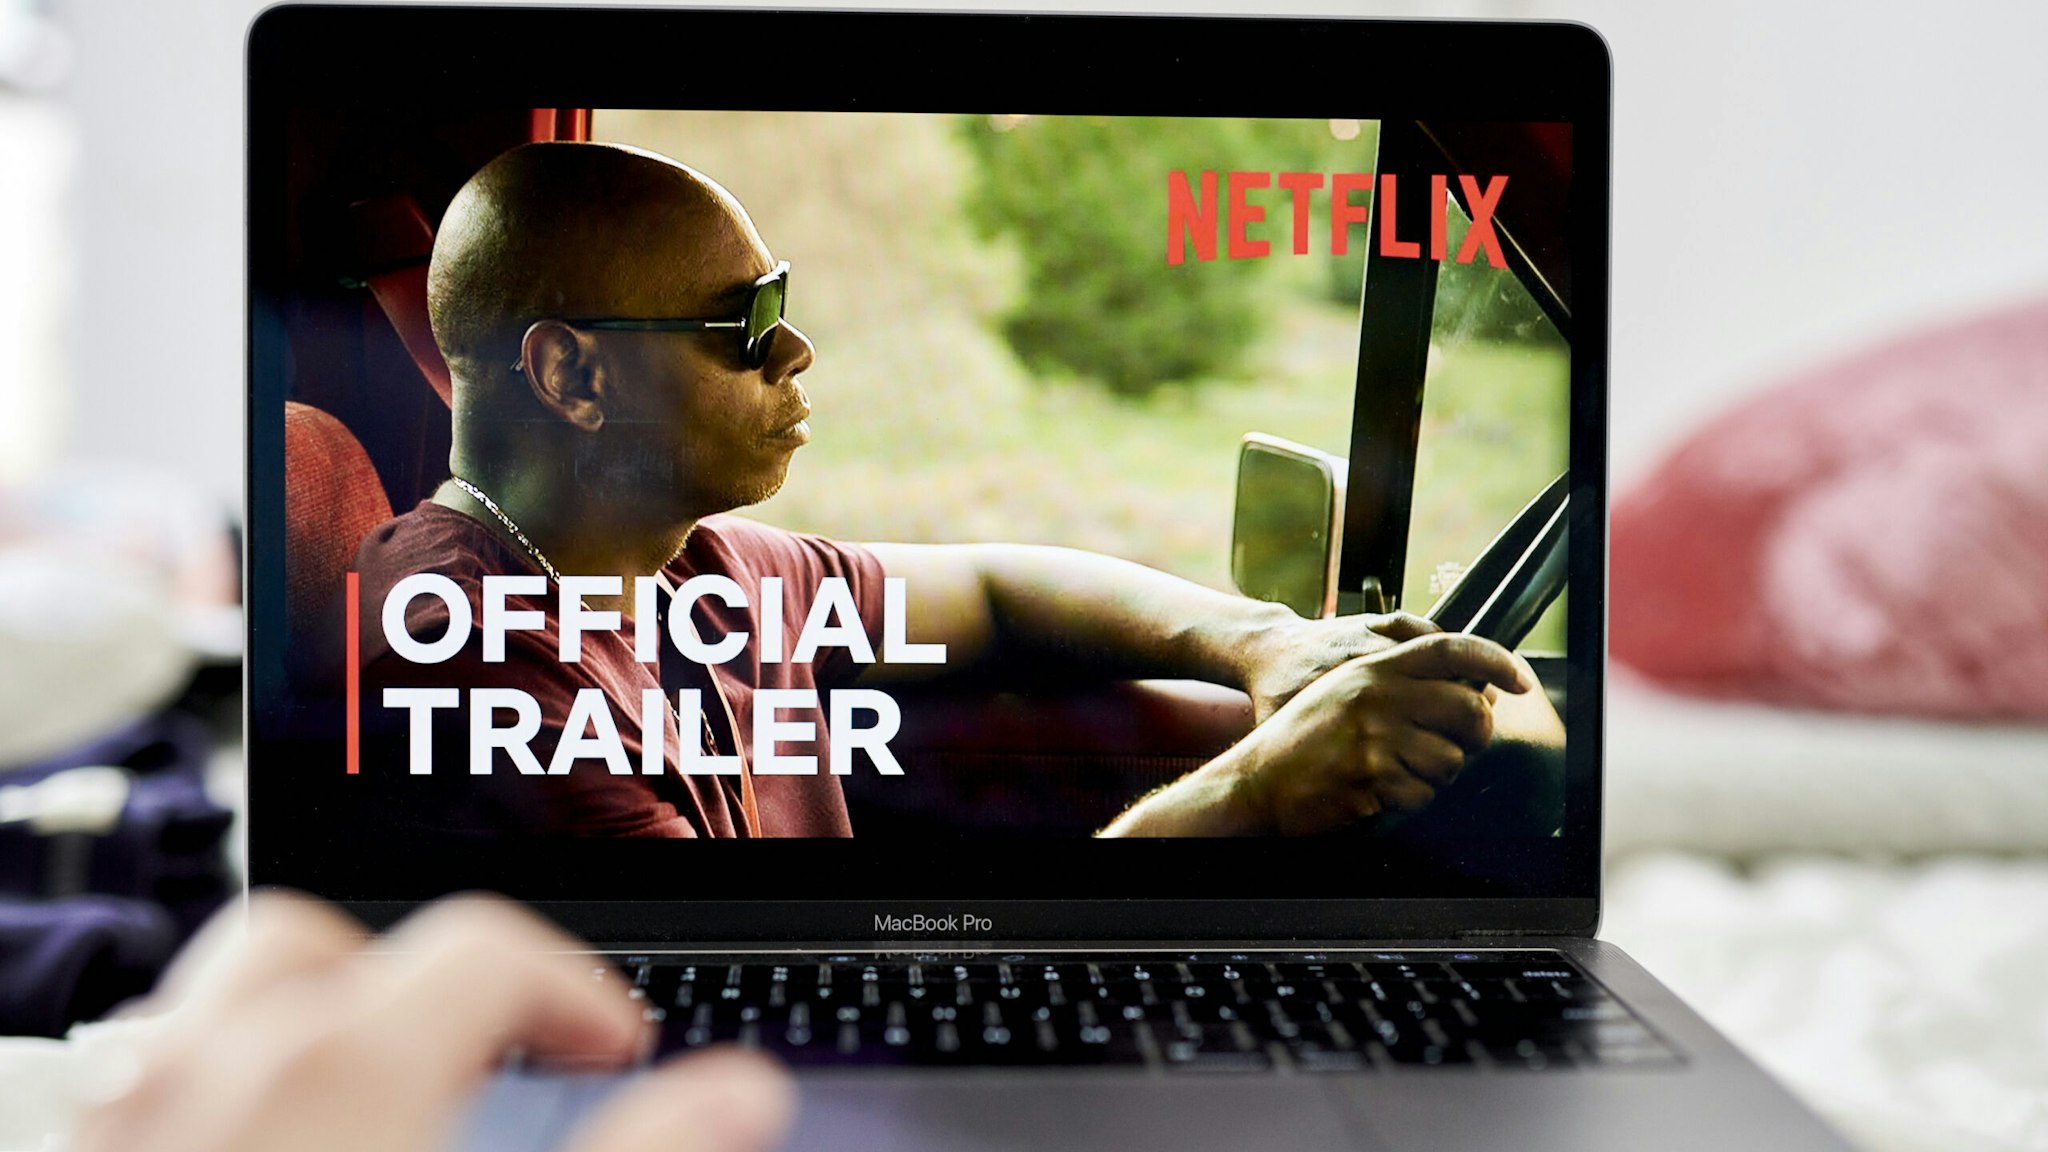 The Netflix Inc. stand-up comedy special 'Dave Chappelle: The Closer' trailer on a laptop computer arranged in the Brooklyn Borough of New York, U.S., on Saturday, Oct. 16, 2021.